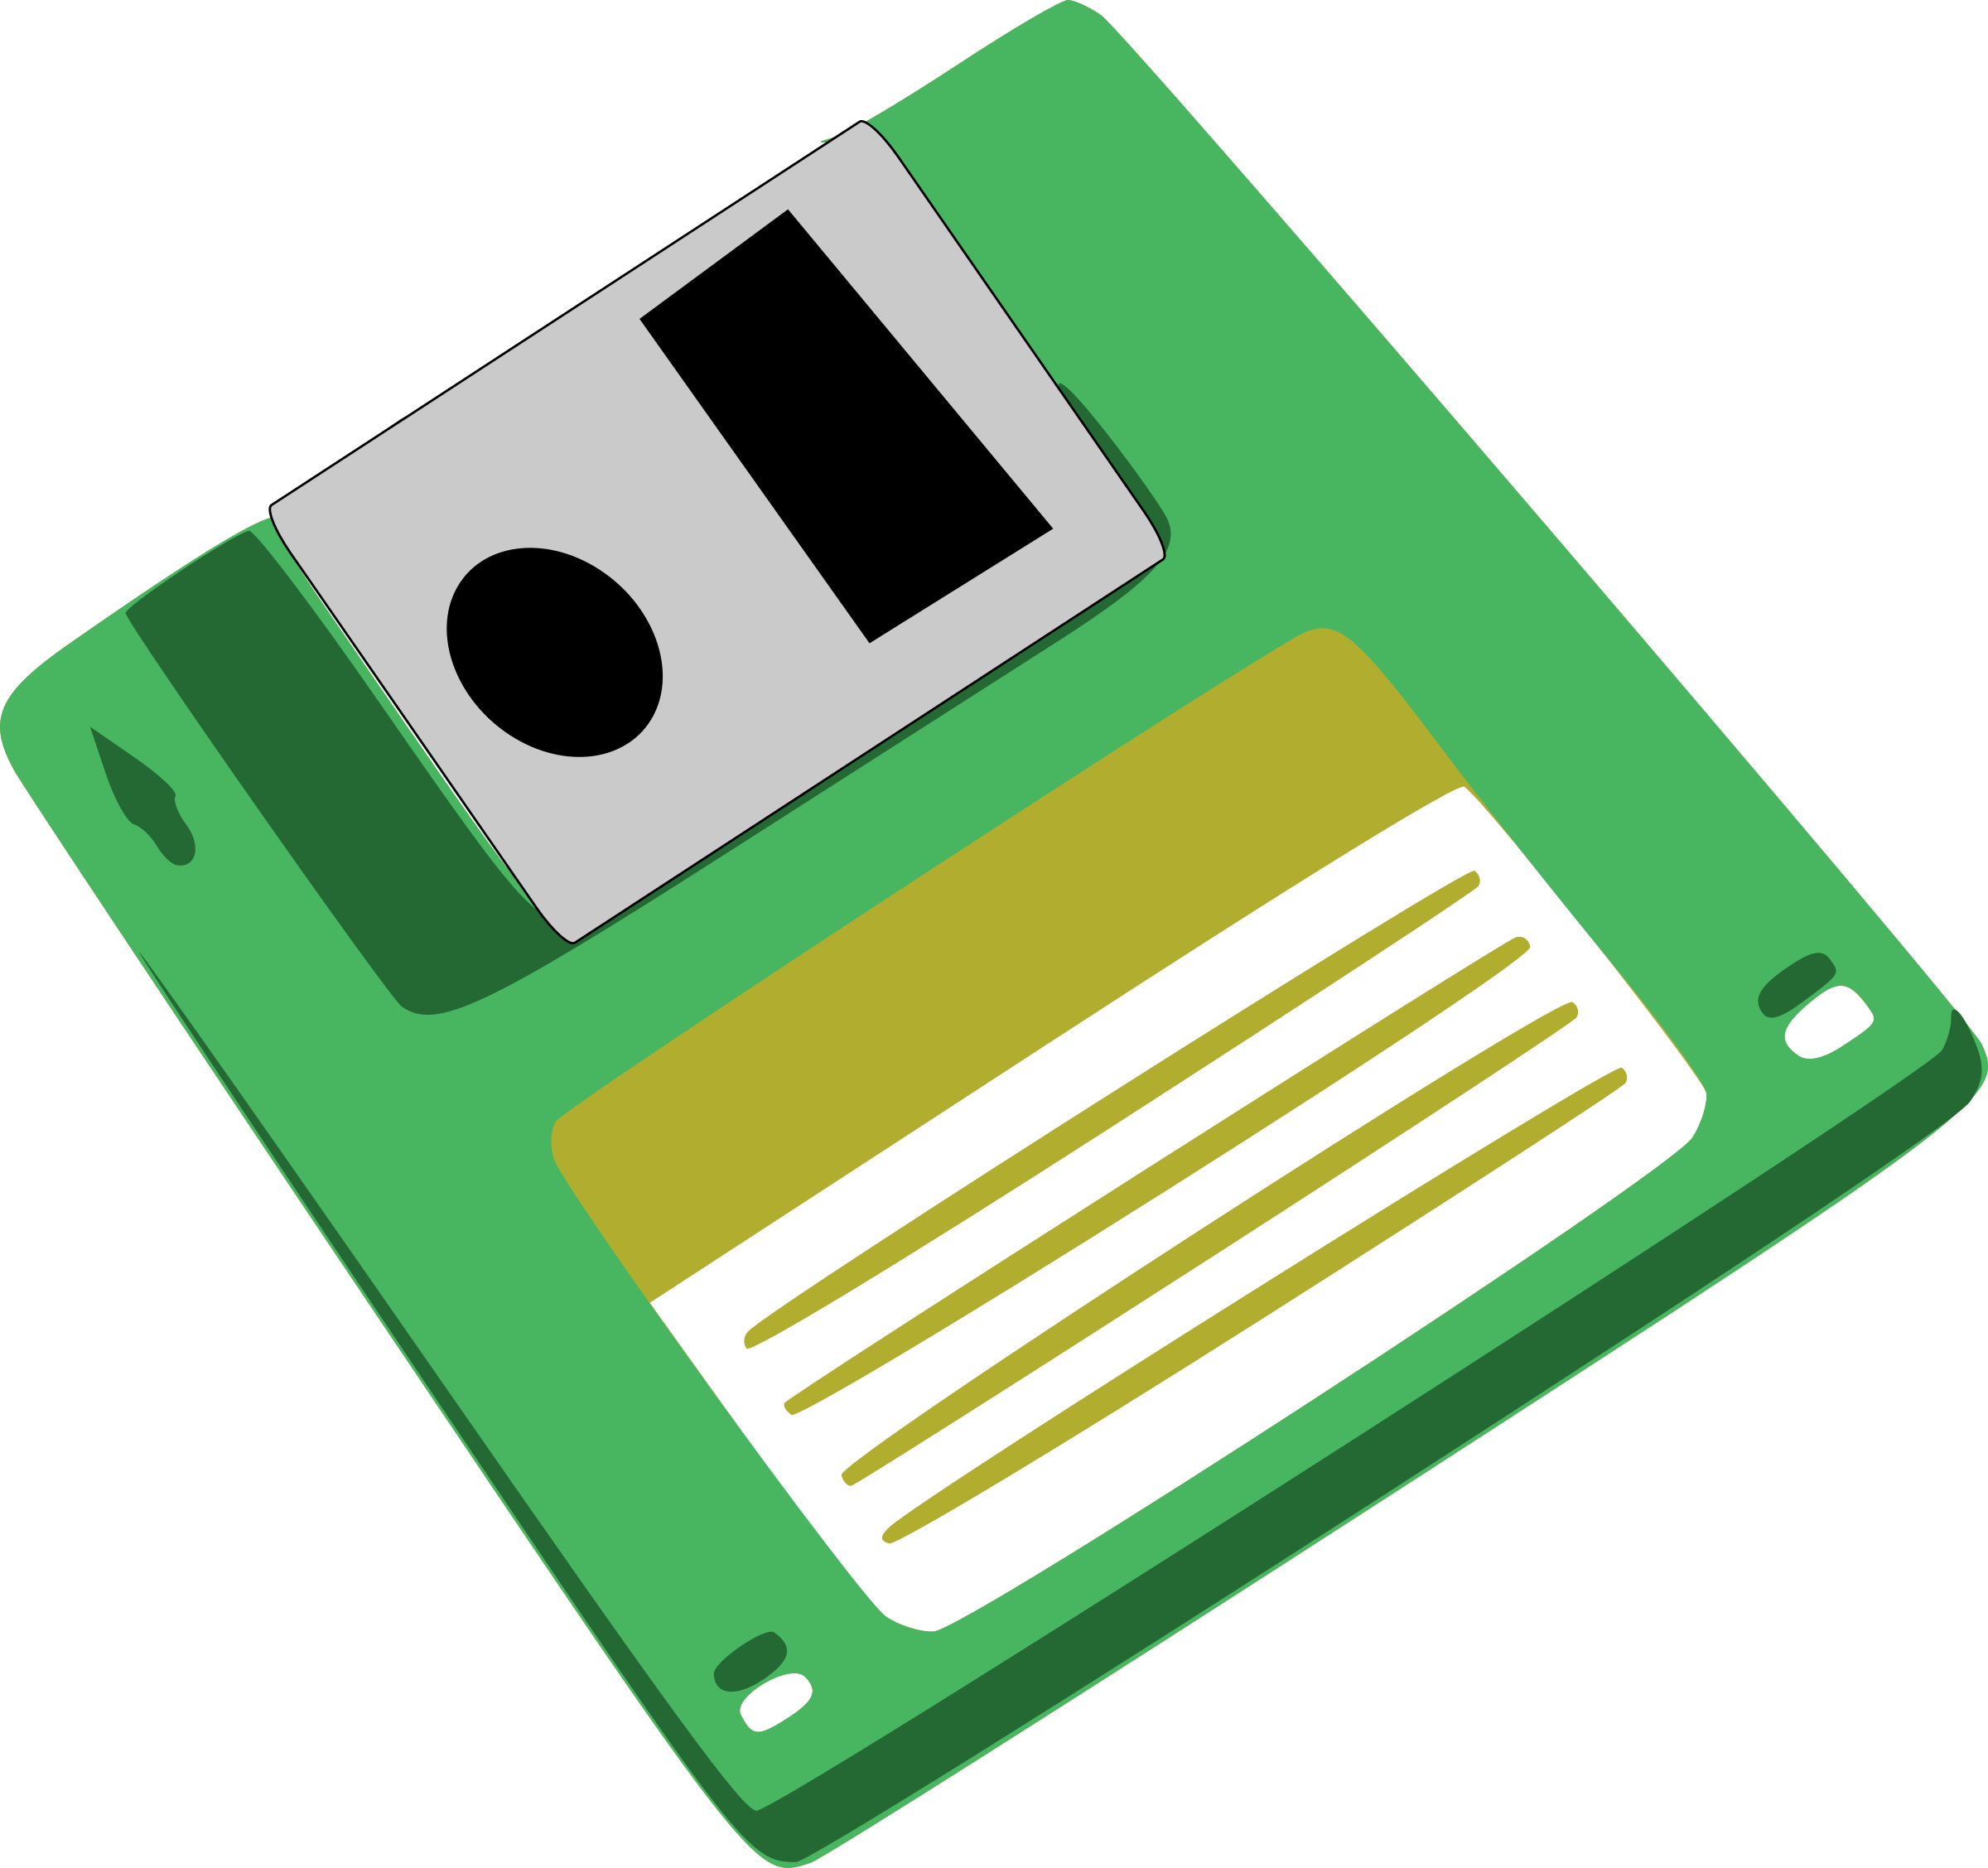 Green floppy icons png. Clipart music disk